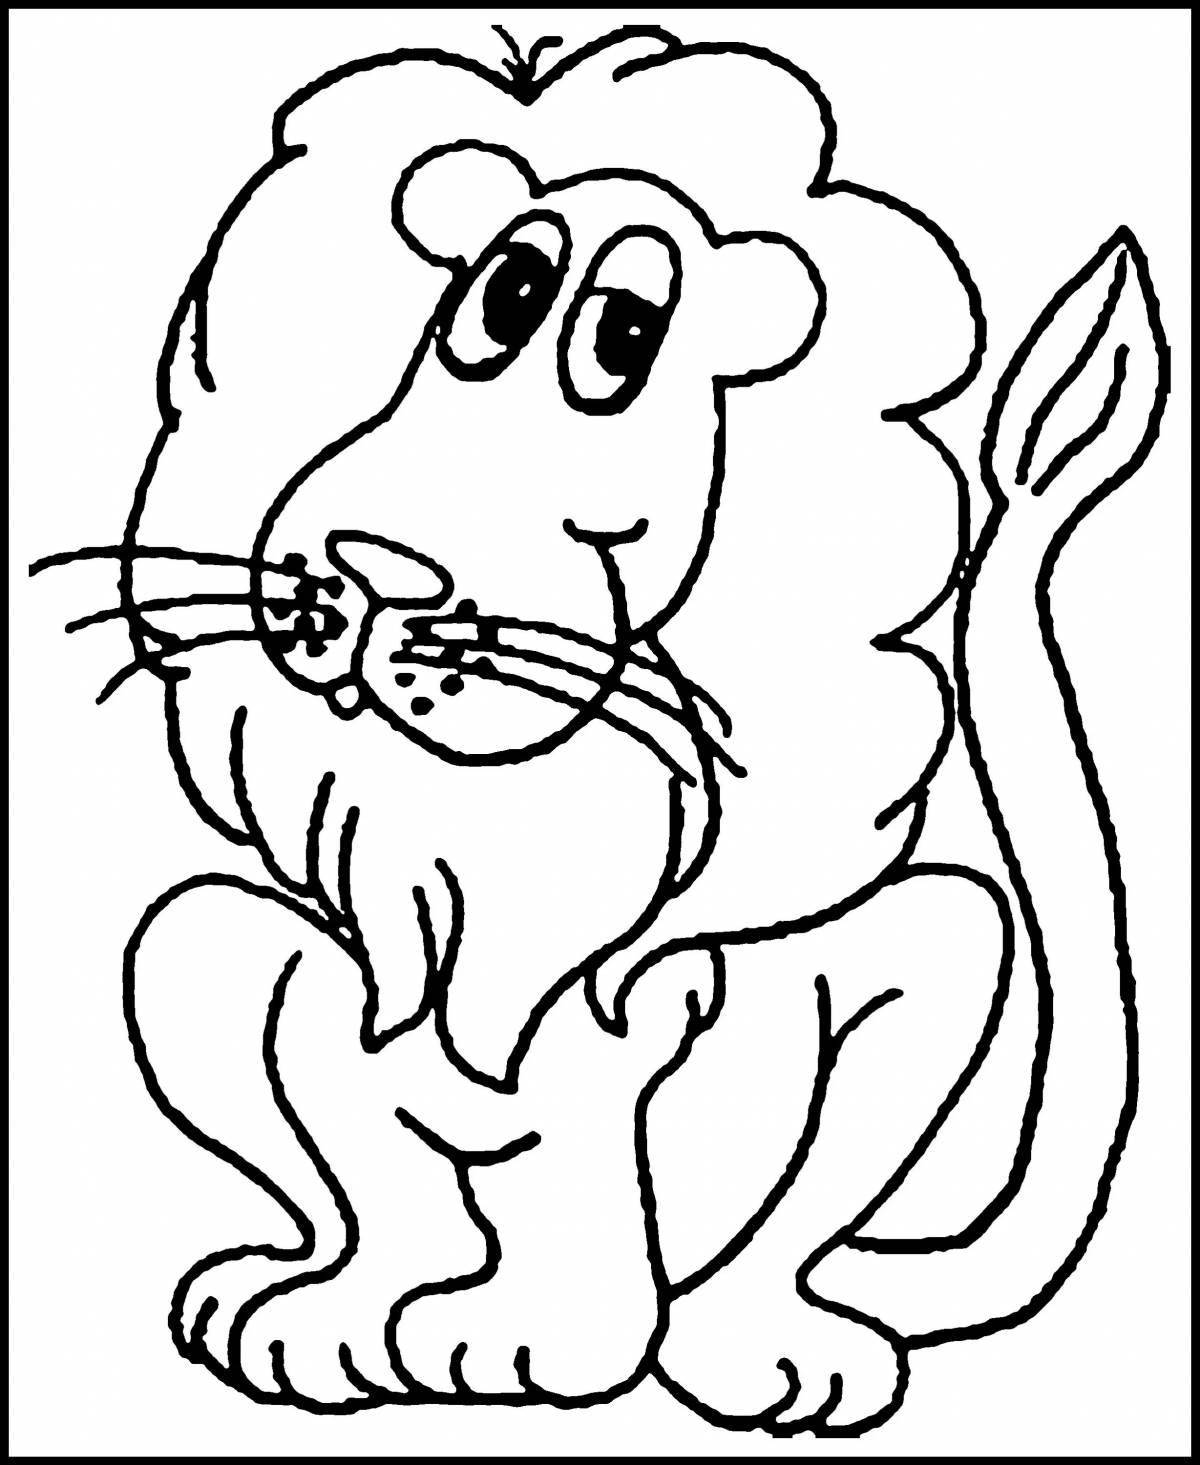 Colored lion coloring book for kids